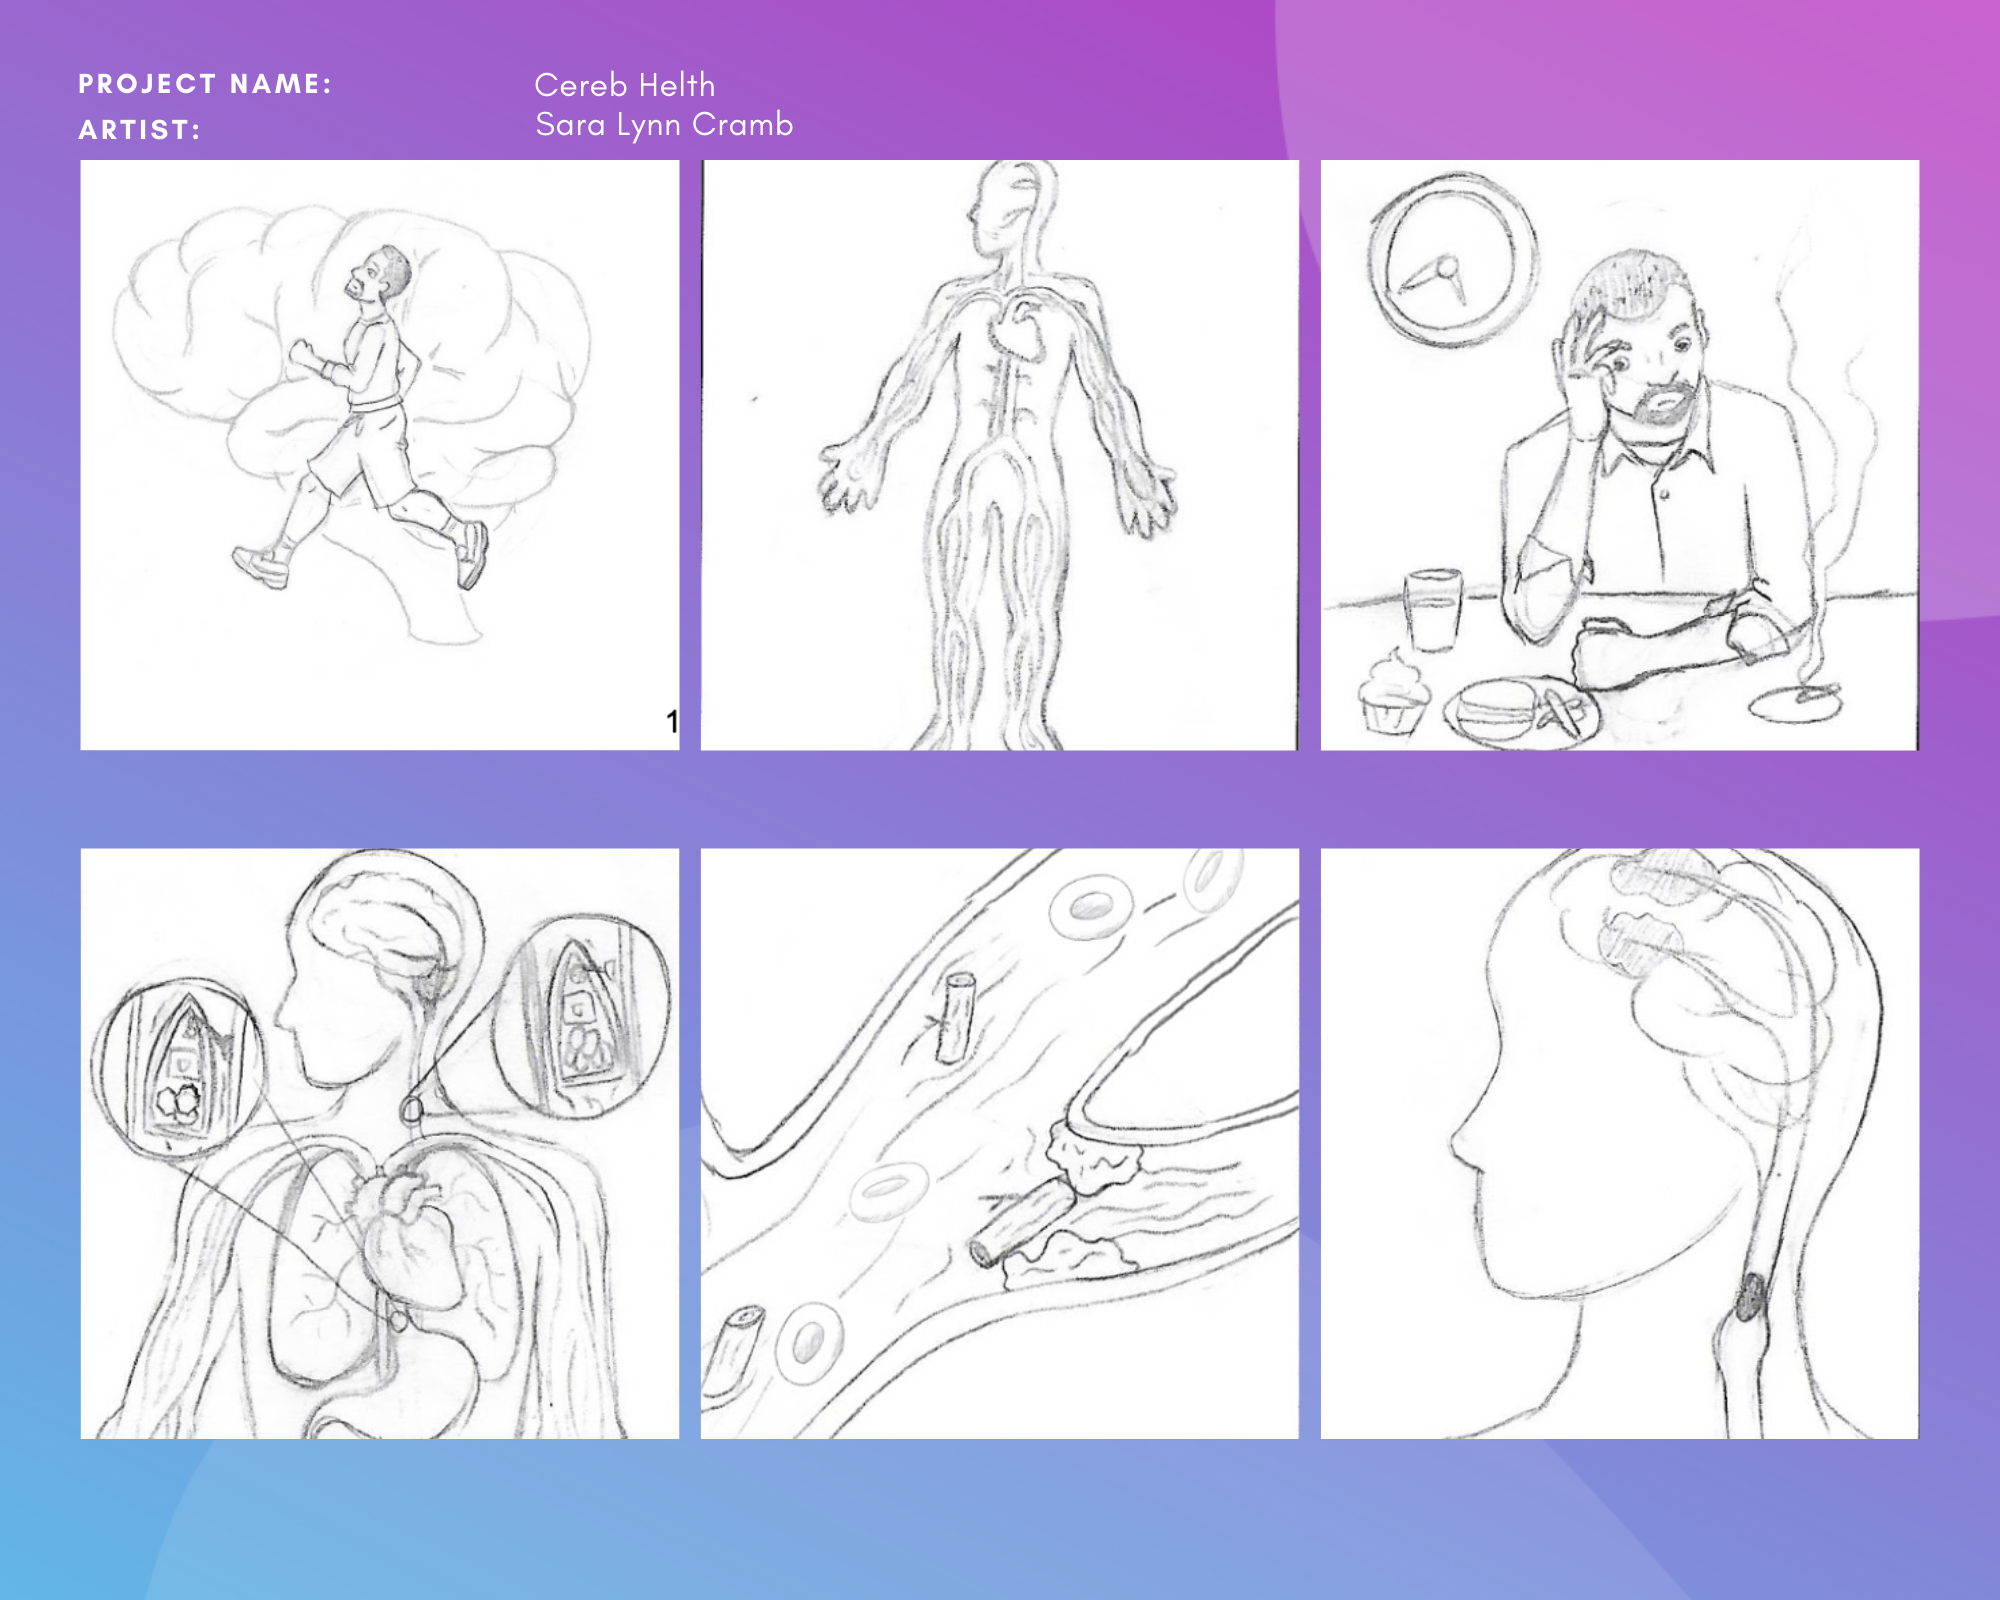 Storyboard line drawings for a course on eating healthy fats and brain health. Illustrations depict the brain and clogged arteries.